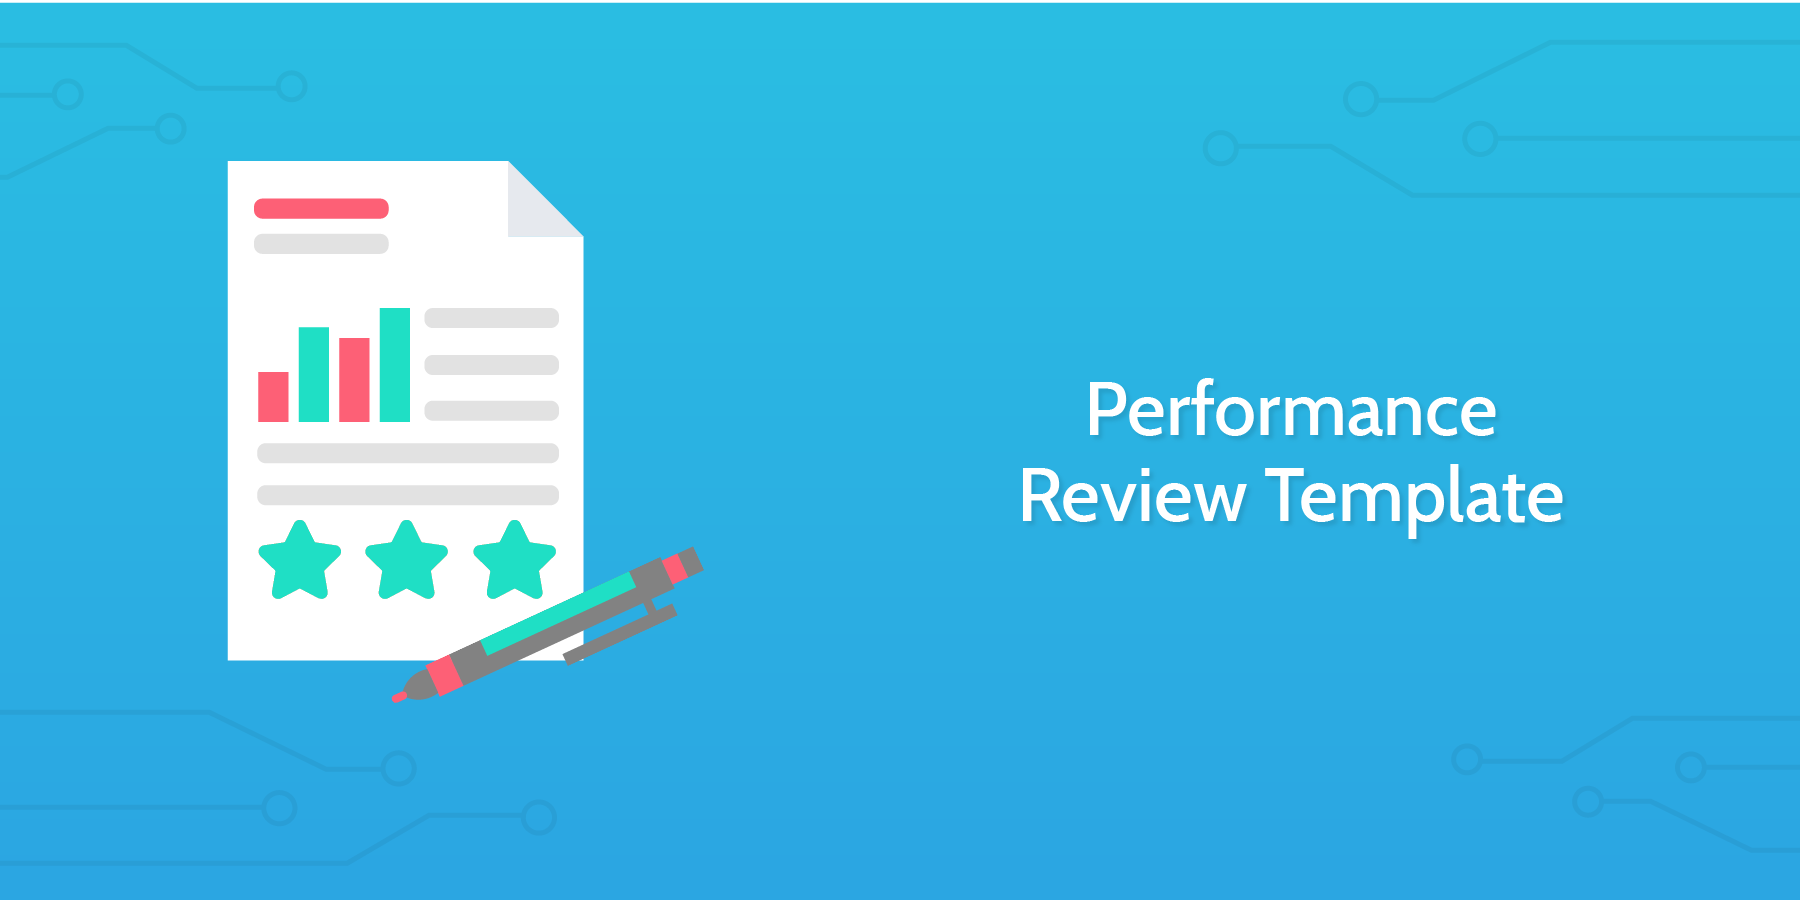 Performance Review Template - Introduction